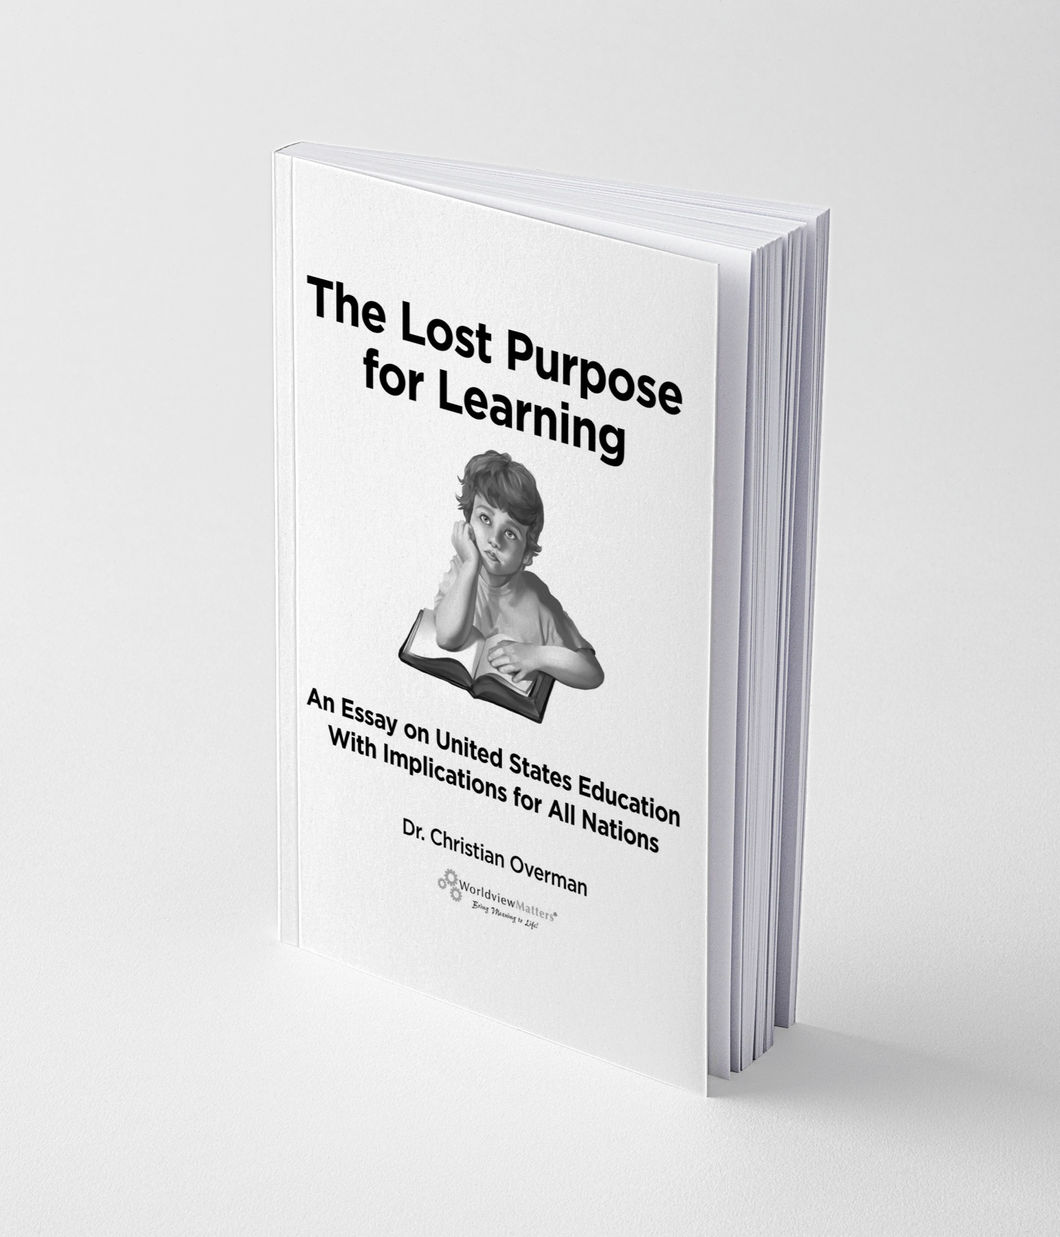 The Lost Purpose for Learning